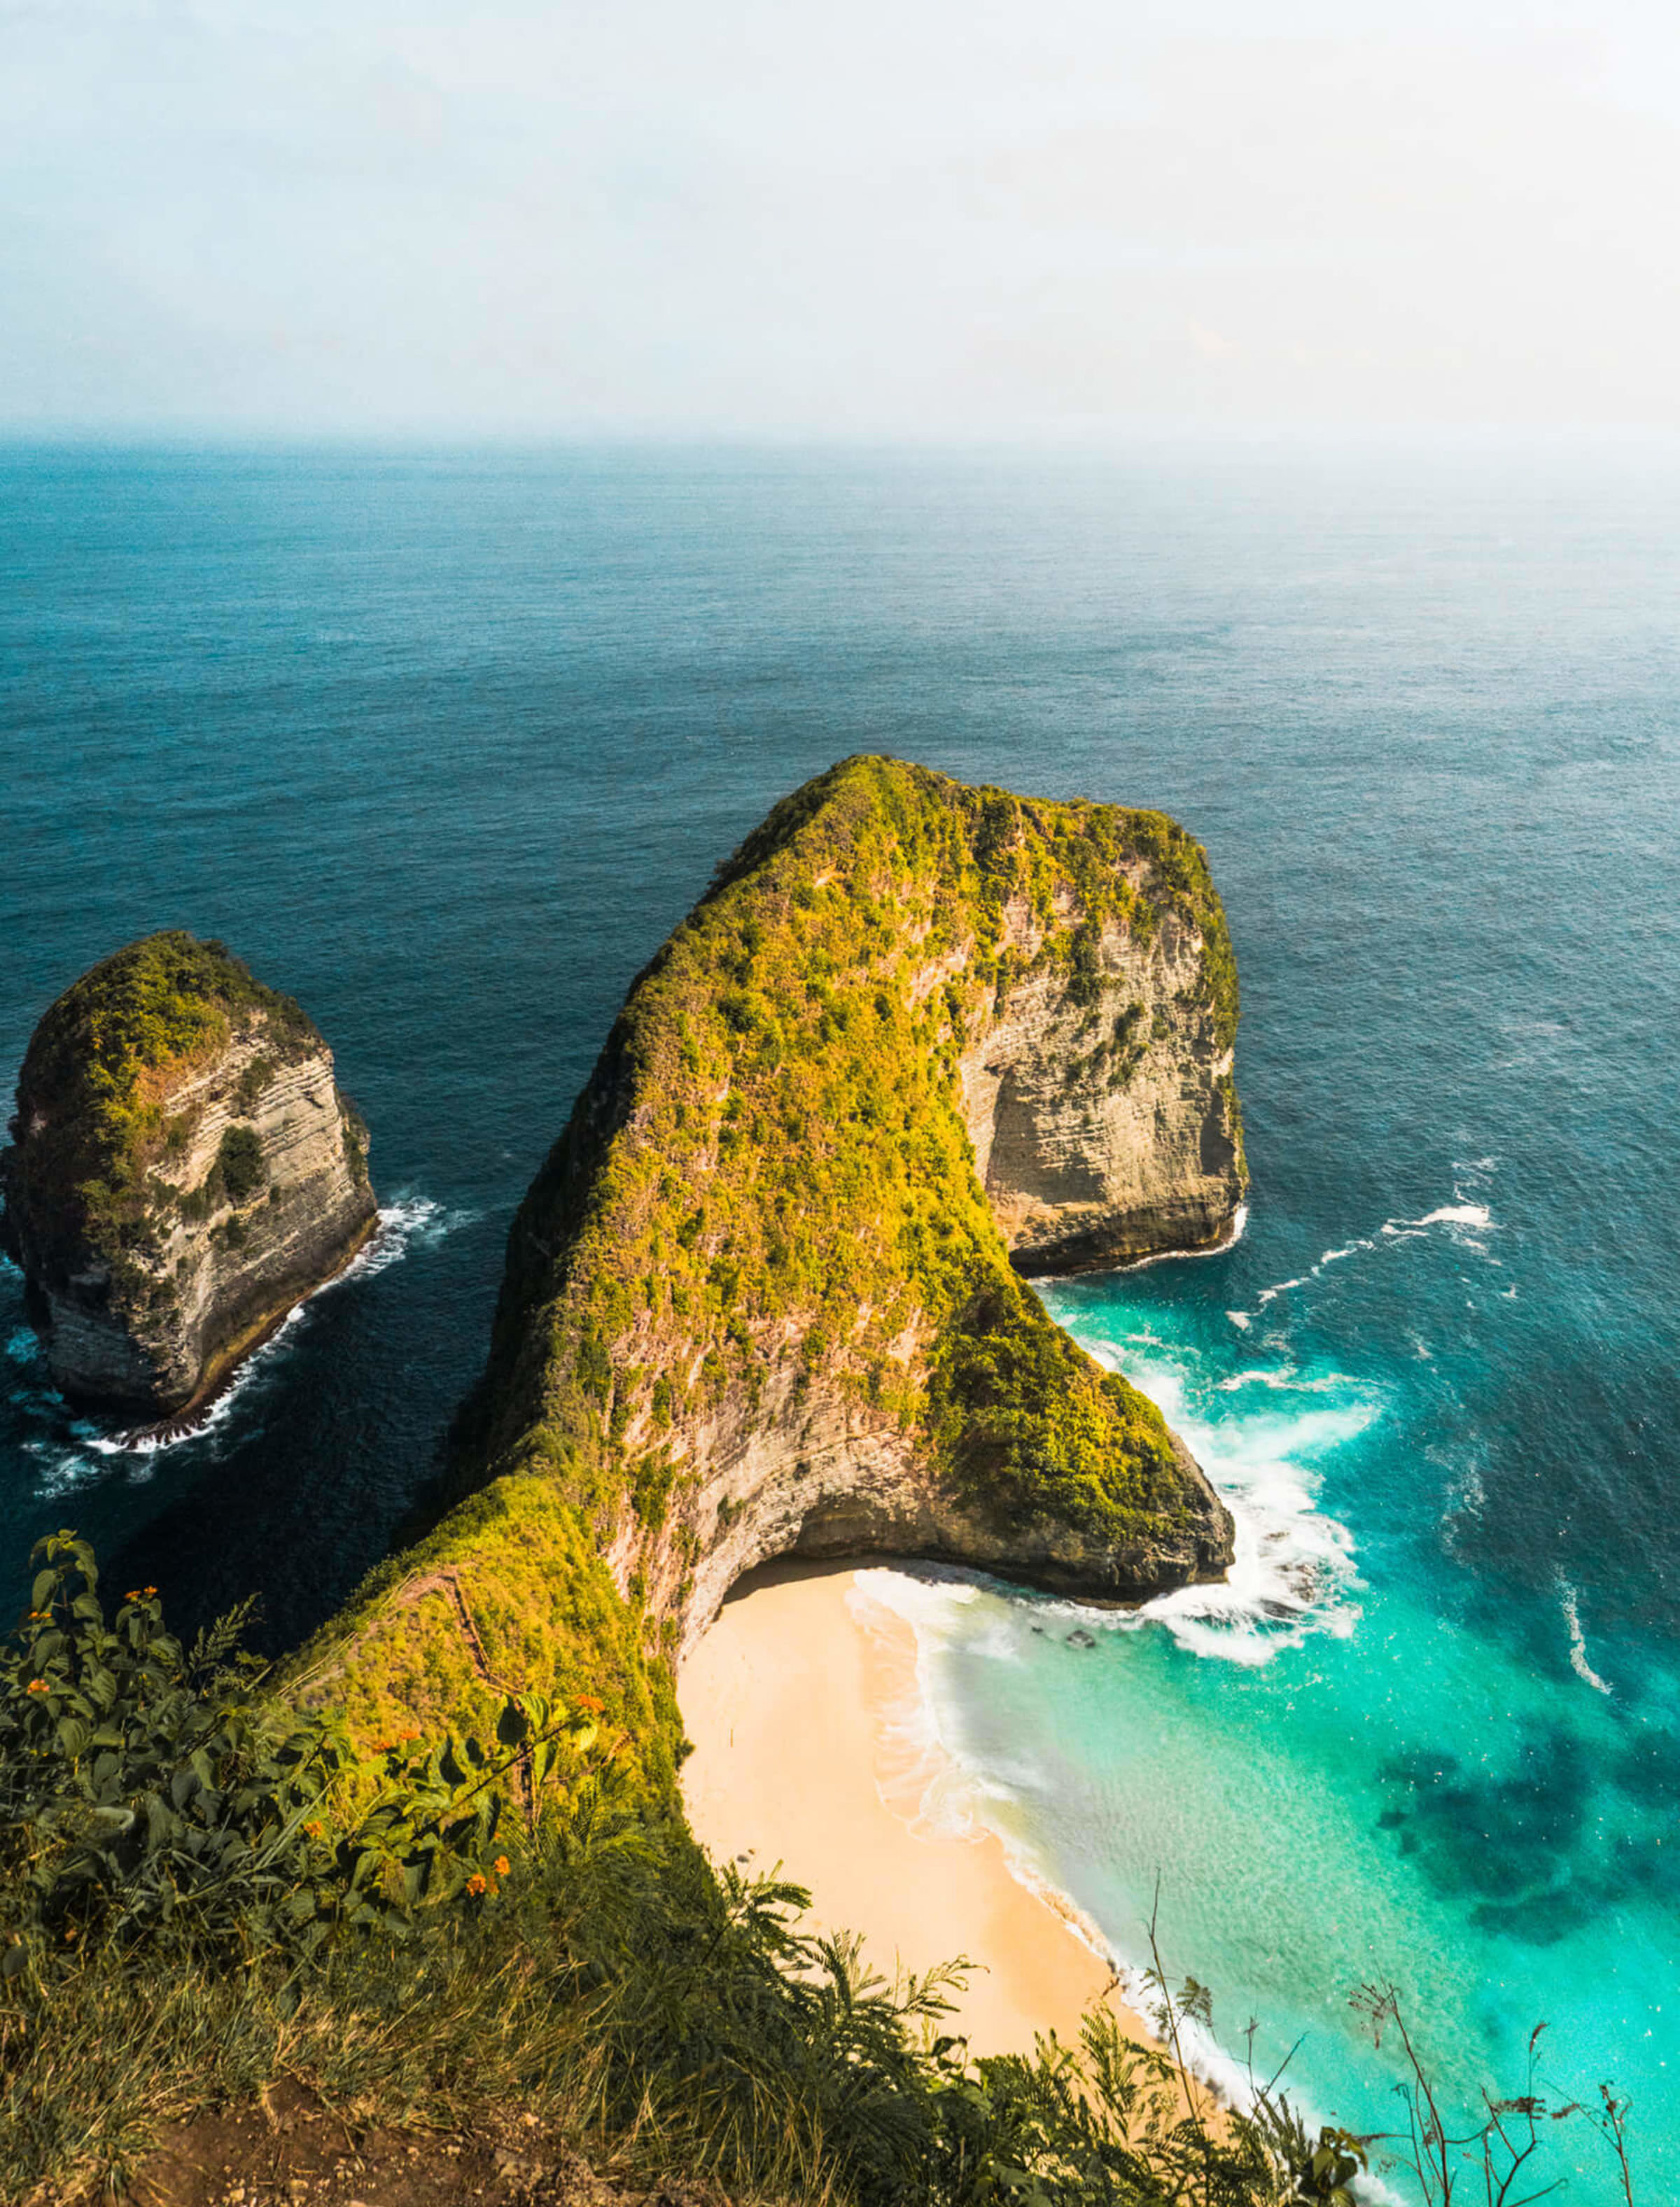 The 12 night Bali vacation itinerary for fun lovers